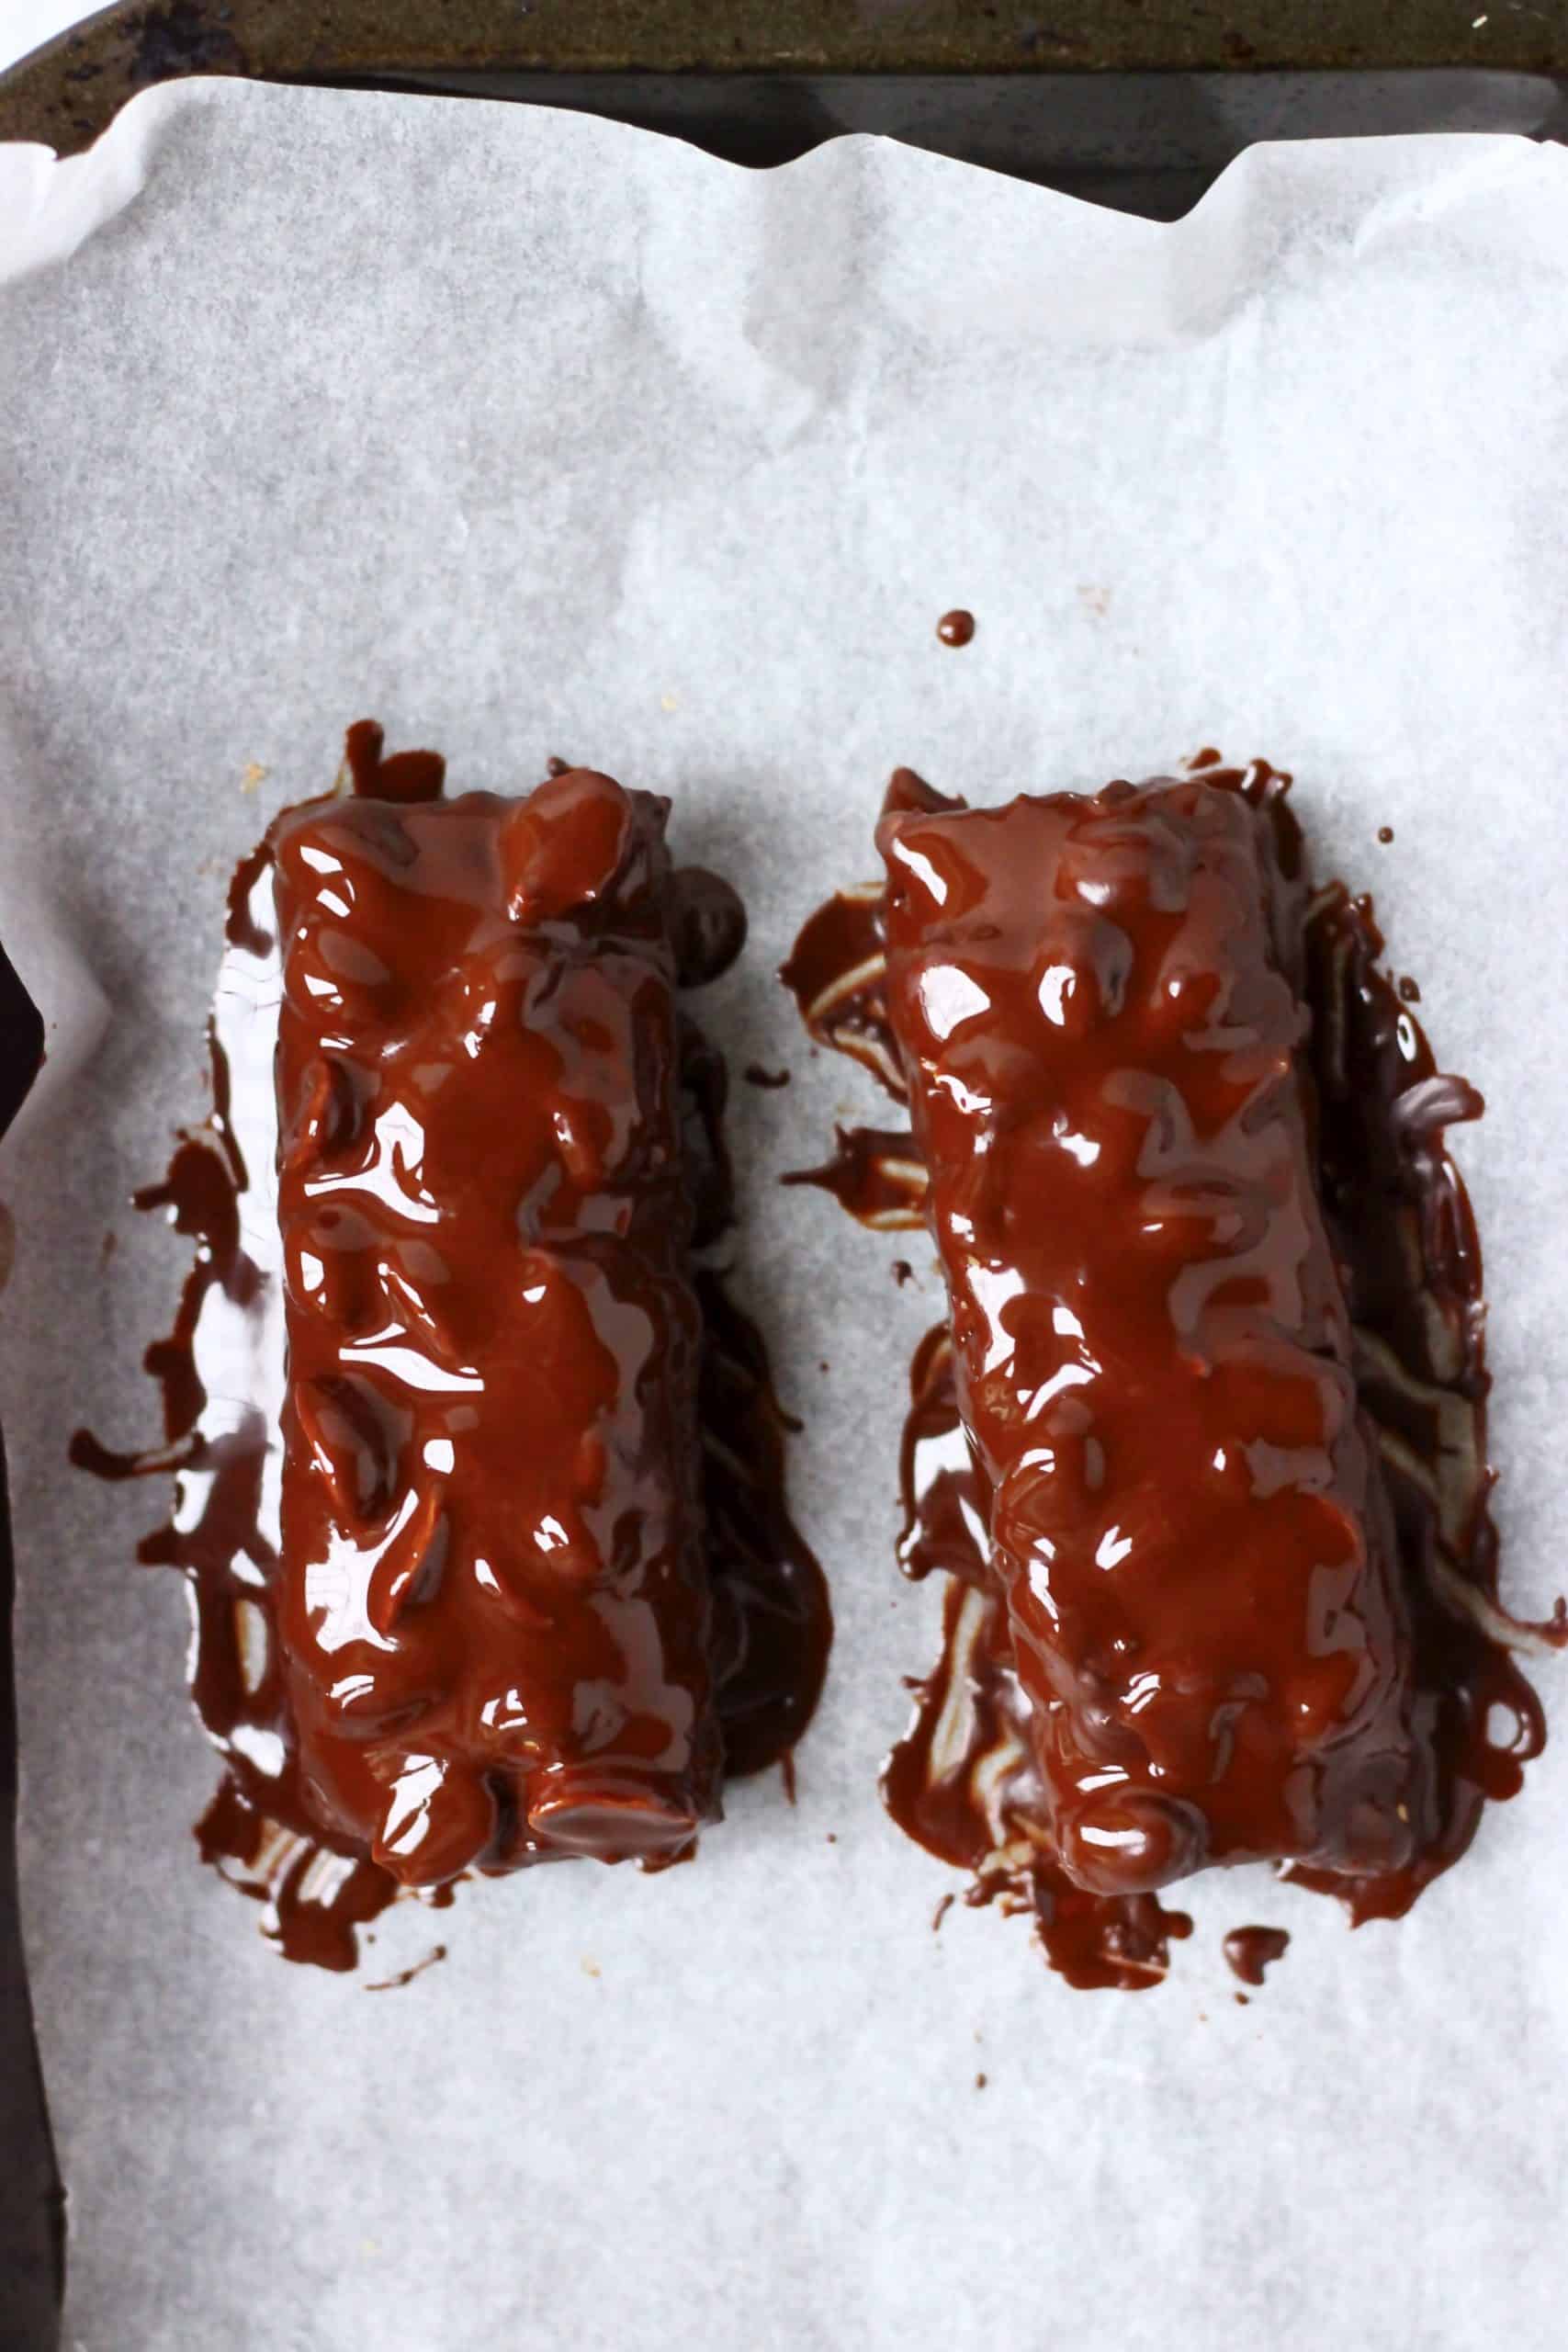 Two vegan snickers bars dipped in melted chocolate on a baking tray lined with paper